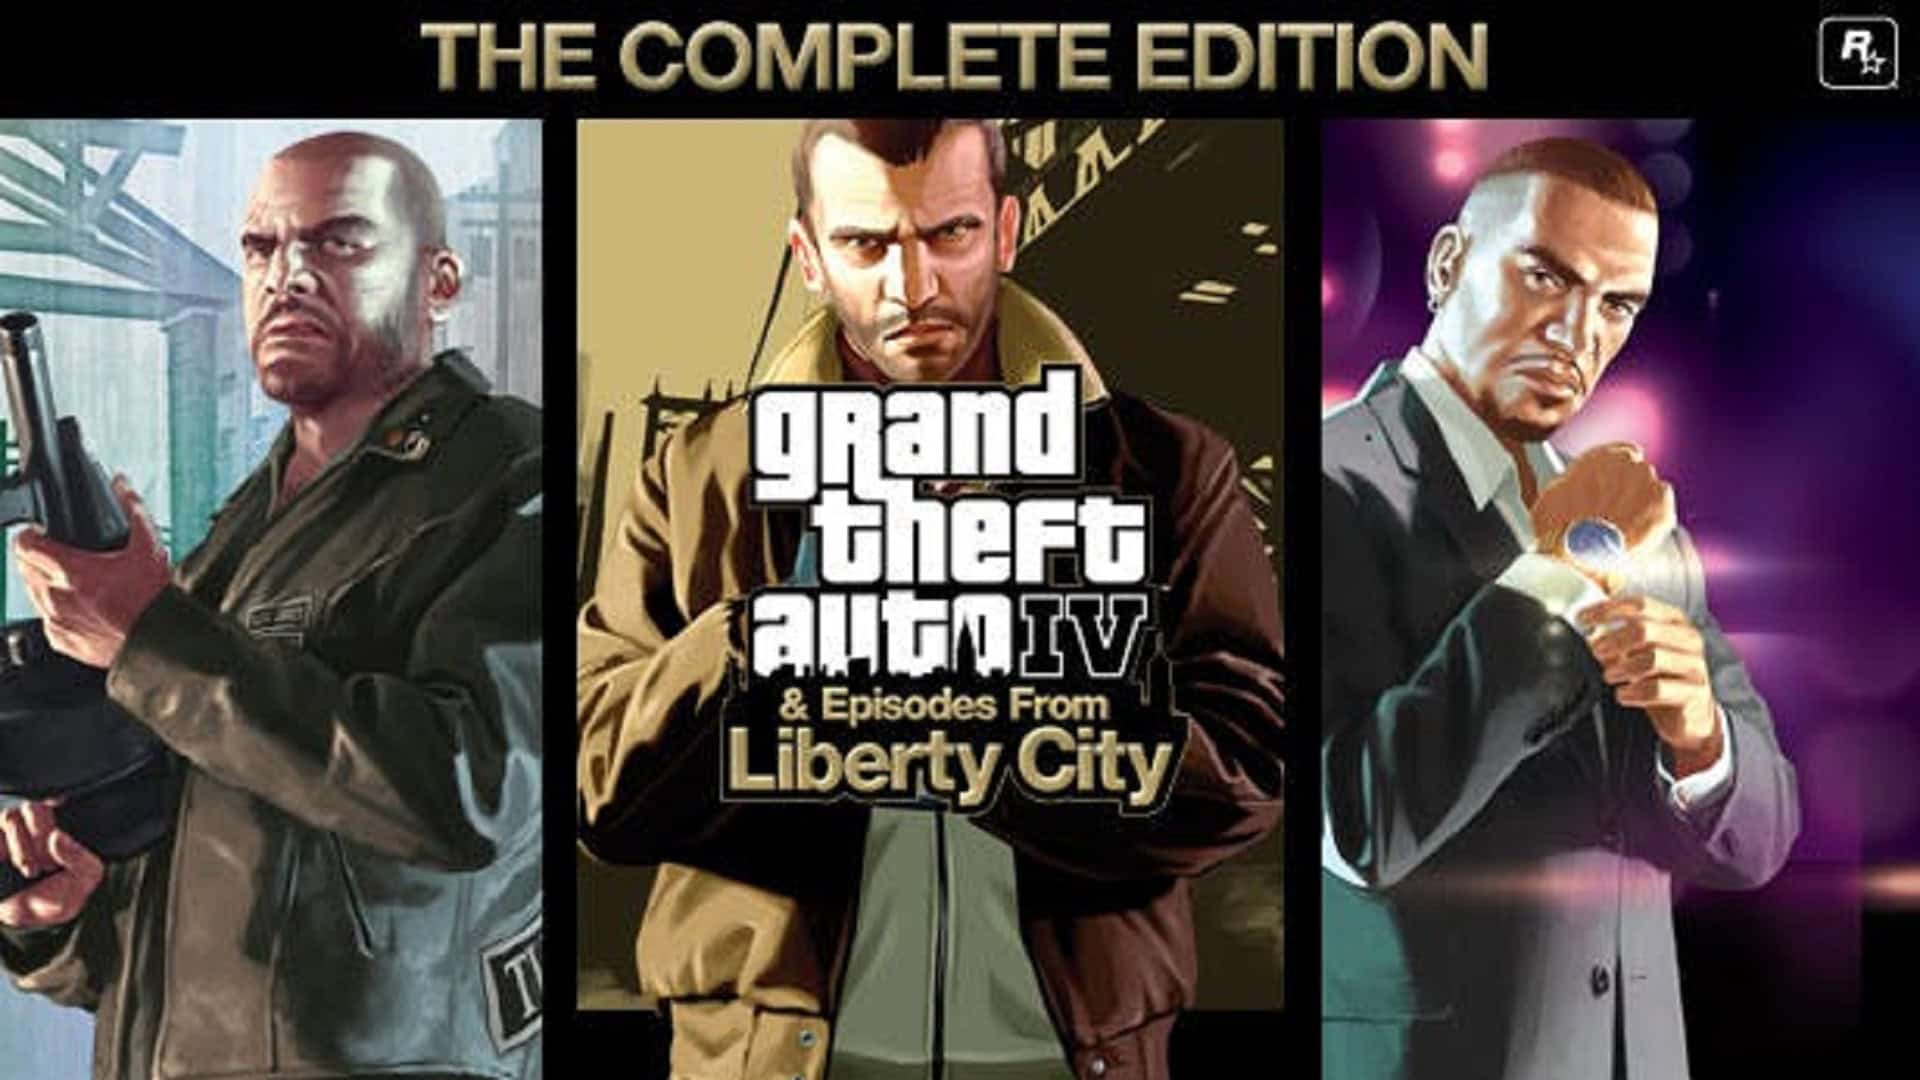 grand-theft-auto-4-complete-edition-listing-spotted-for-ps5-on-amazon-neogaf